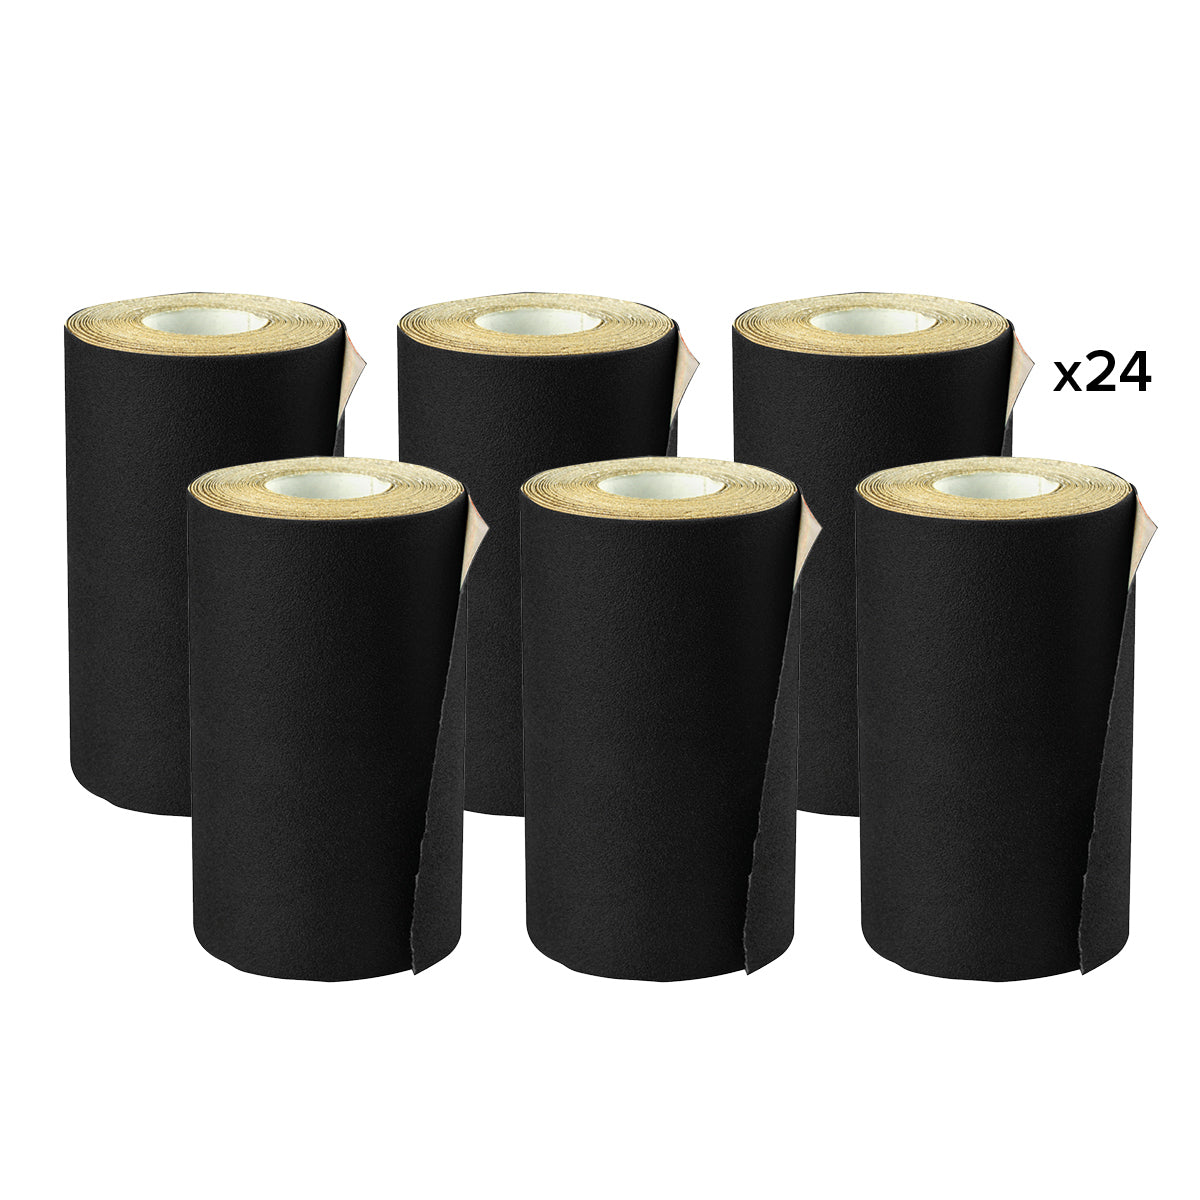 Handy Hardware 24PCE Sandpaper Rolls Wet & Dry Use 400 Grit Cut To Size 3m